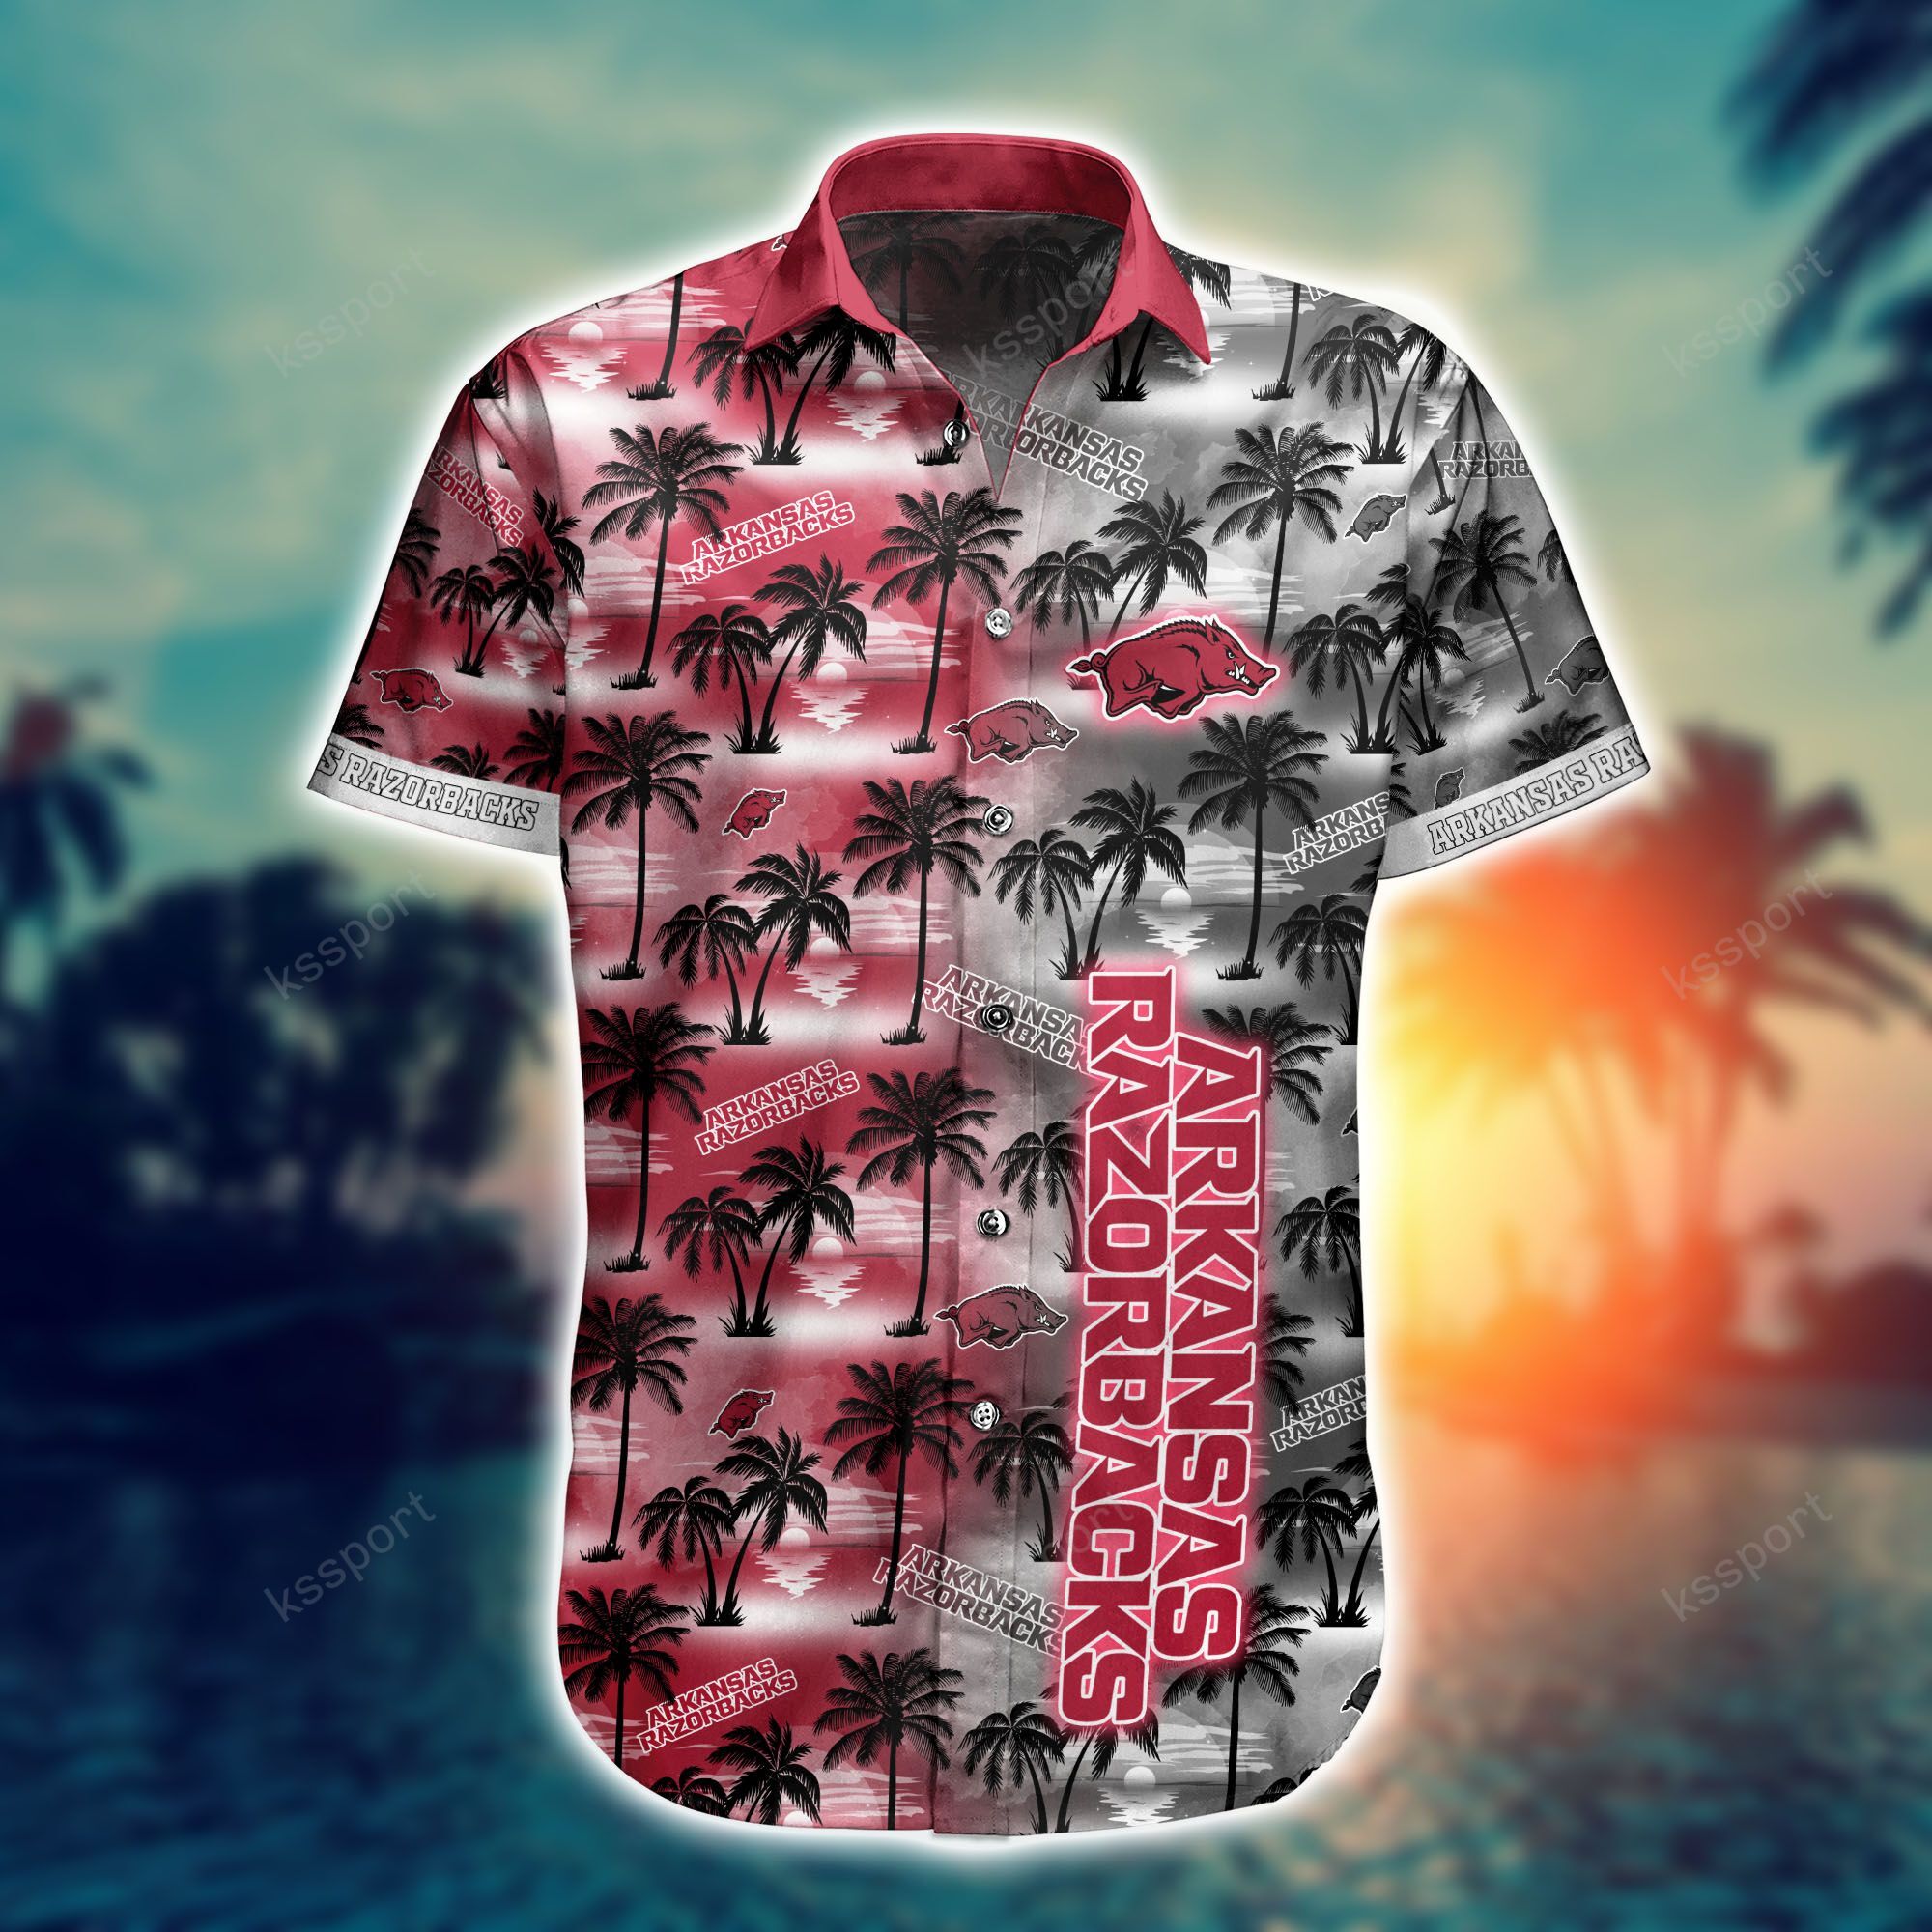 Top cool Hawaiian shirt 2022 - Make sure you get yours today before they run out! 120